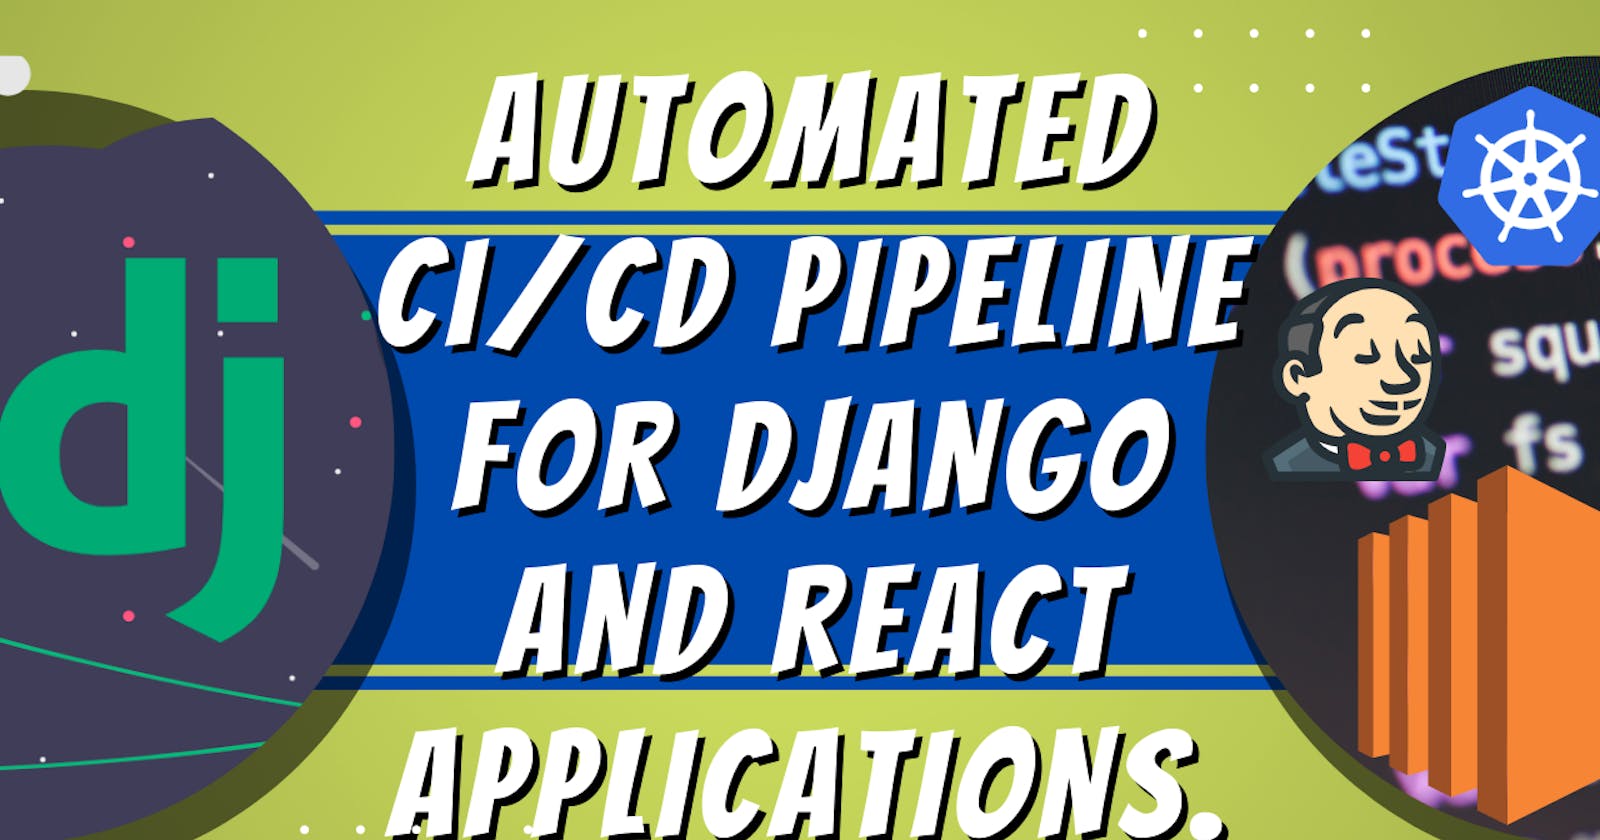 Automated CI/CD Pipeline for Django and React Applications.